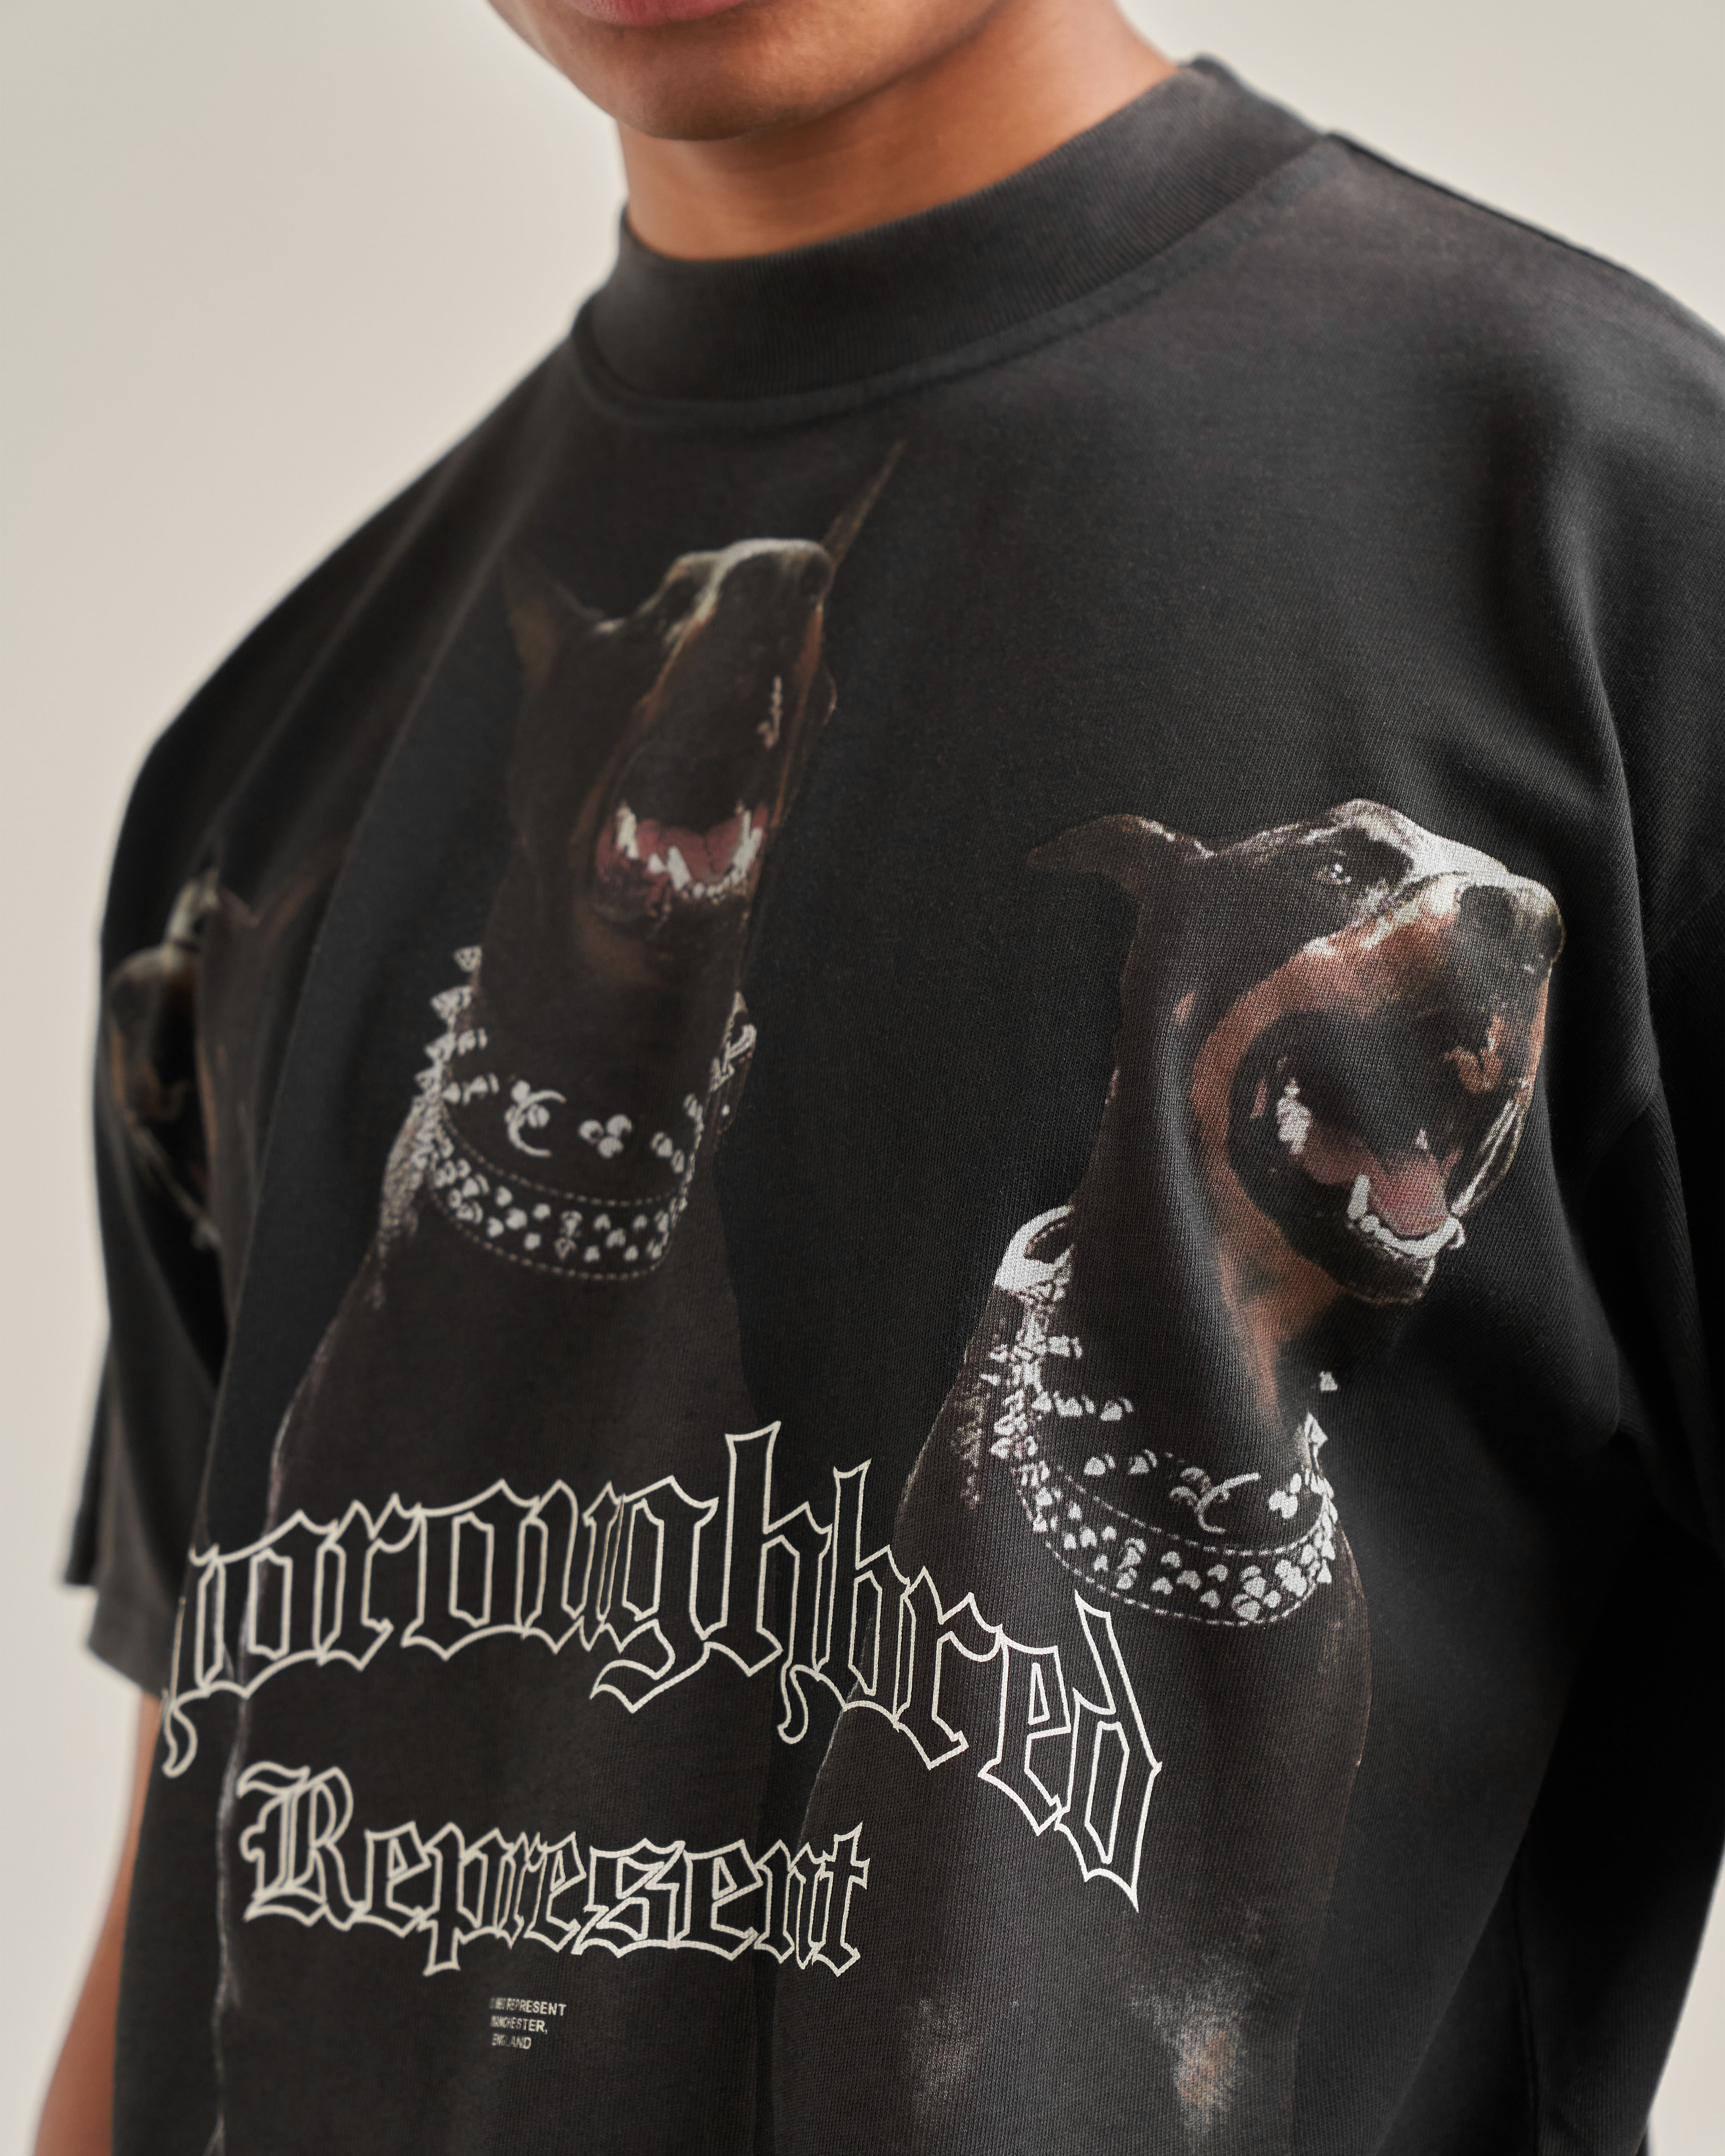 Represent Thoroughbred T-Shirt in Vintage Black L